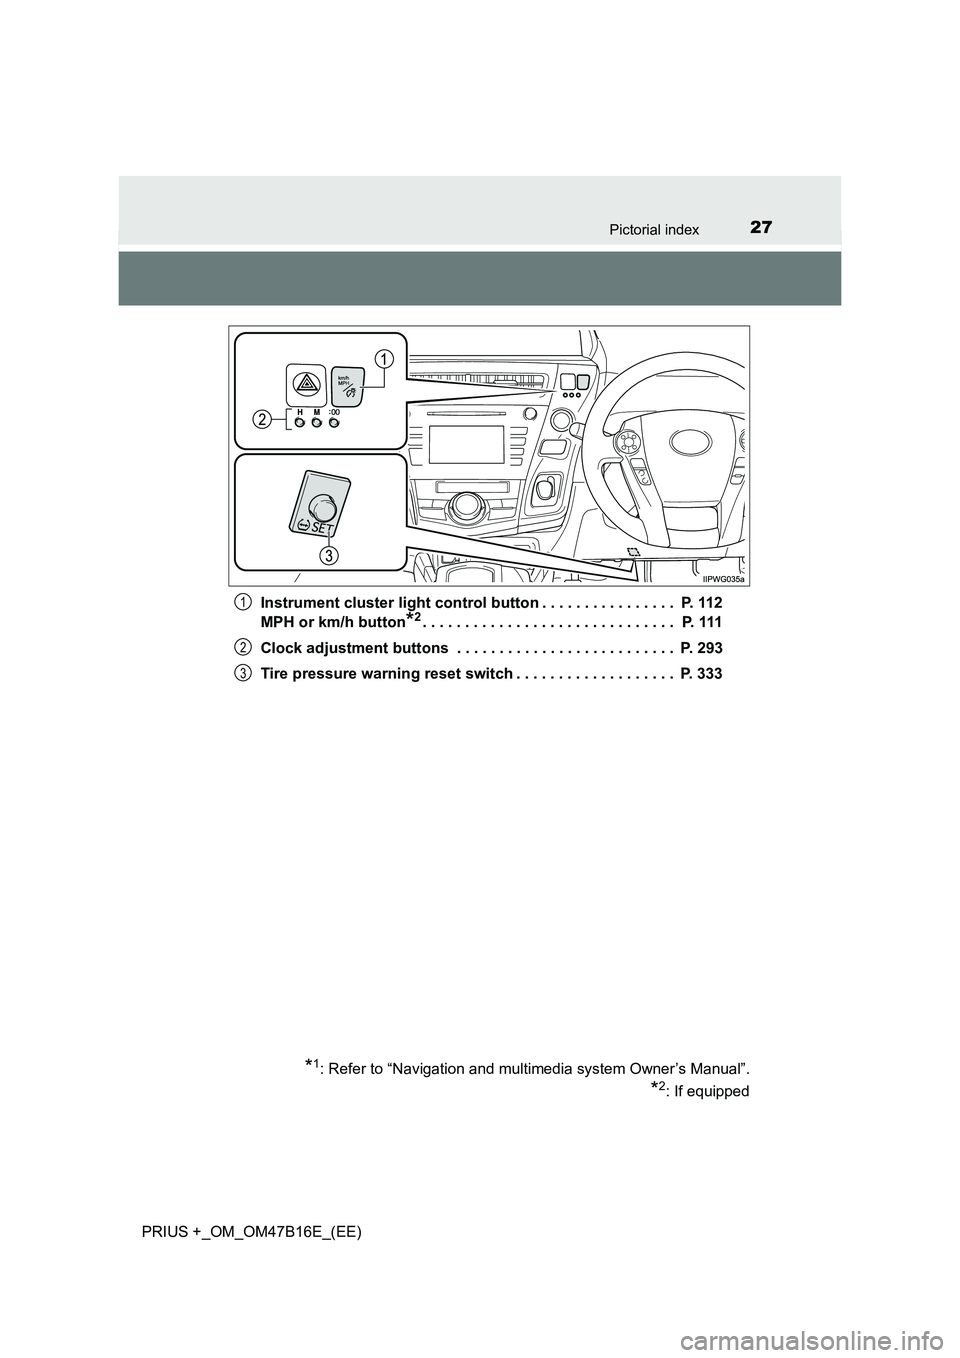 TOYOTA PRIUS PLUS 2015  Owners Manual 27Pictorial index
PRIUS +_OM_OM47B16E_(EE)Instrument cluster light control button . . . . . . . . . . . . . . . .  P. 112
MPH or km/h button
*2. . . . . . . . . . . . . . . . . . . . . . . . . . . . .